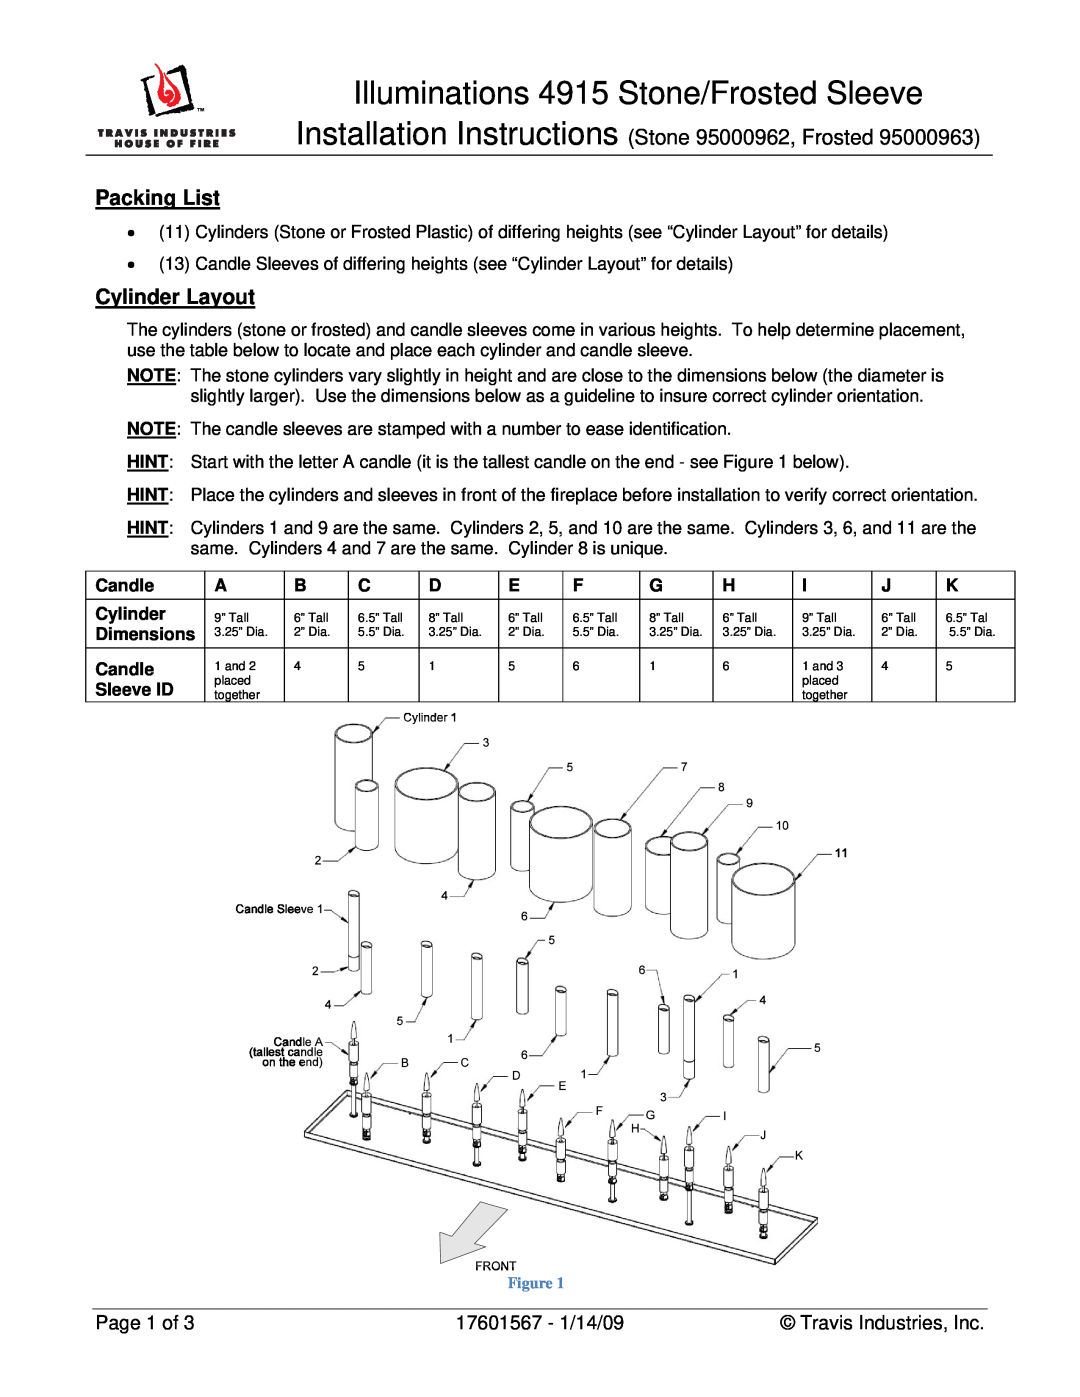 FireplaceXtrordinair installation instructions Illuminations 4915 Stone/Frosted Sleeve, Packing List, Cylinder Layout 